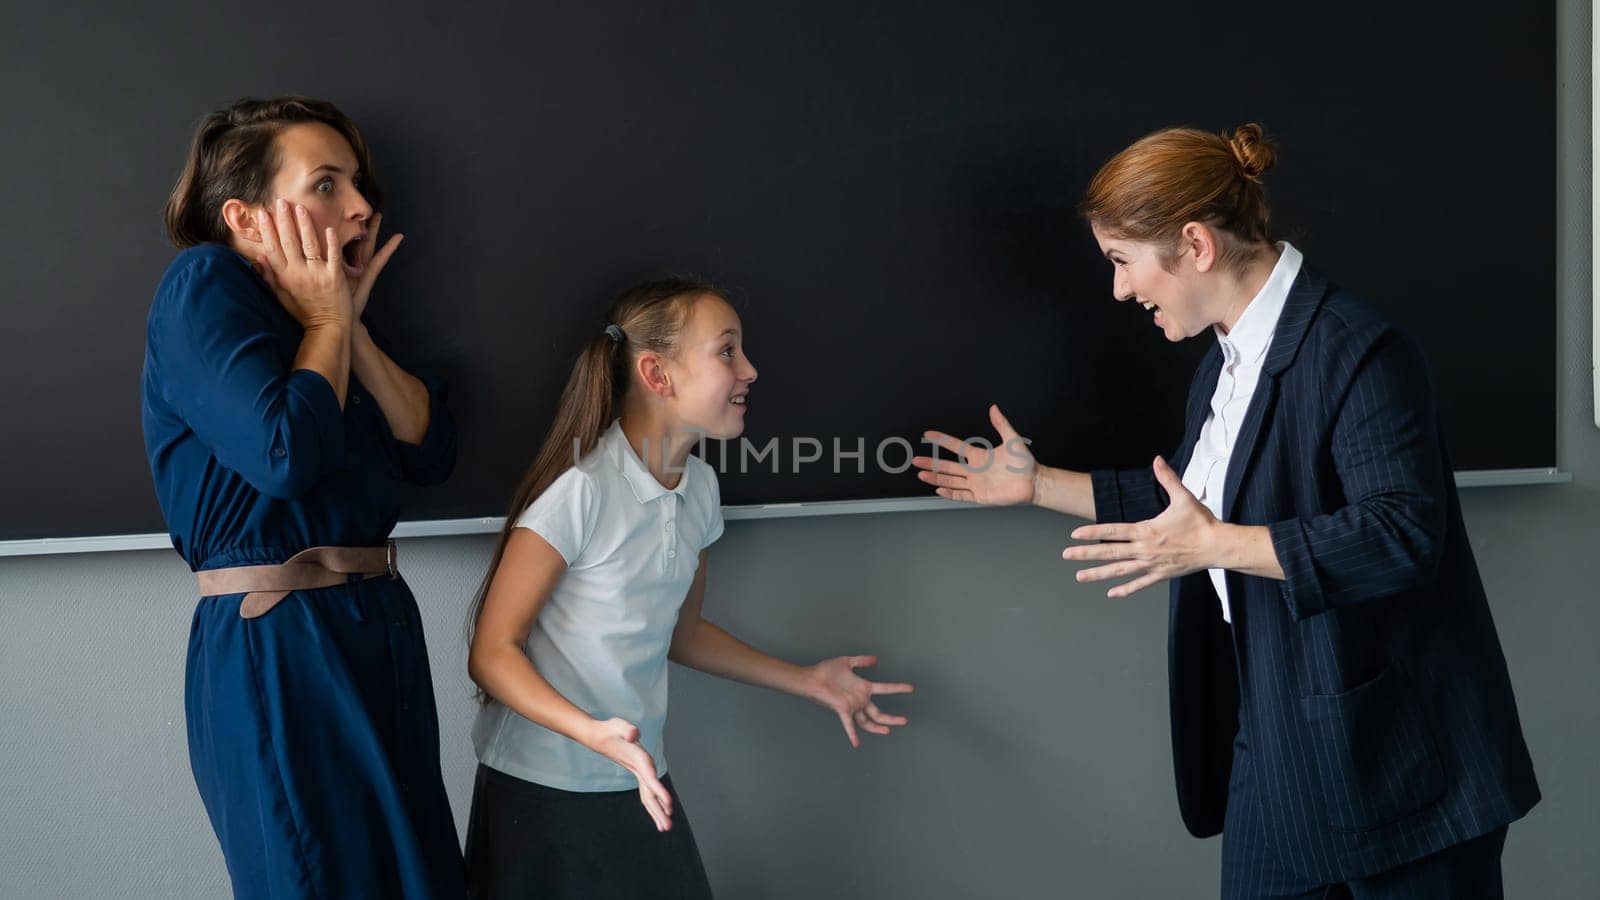 The teacher screams at the schoolgirl and her mother standing at the blackboard. by mrwed54